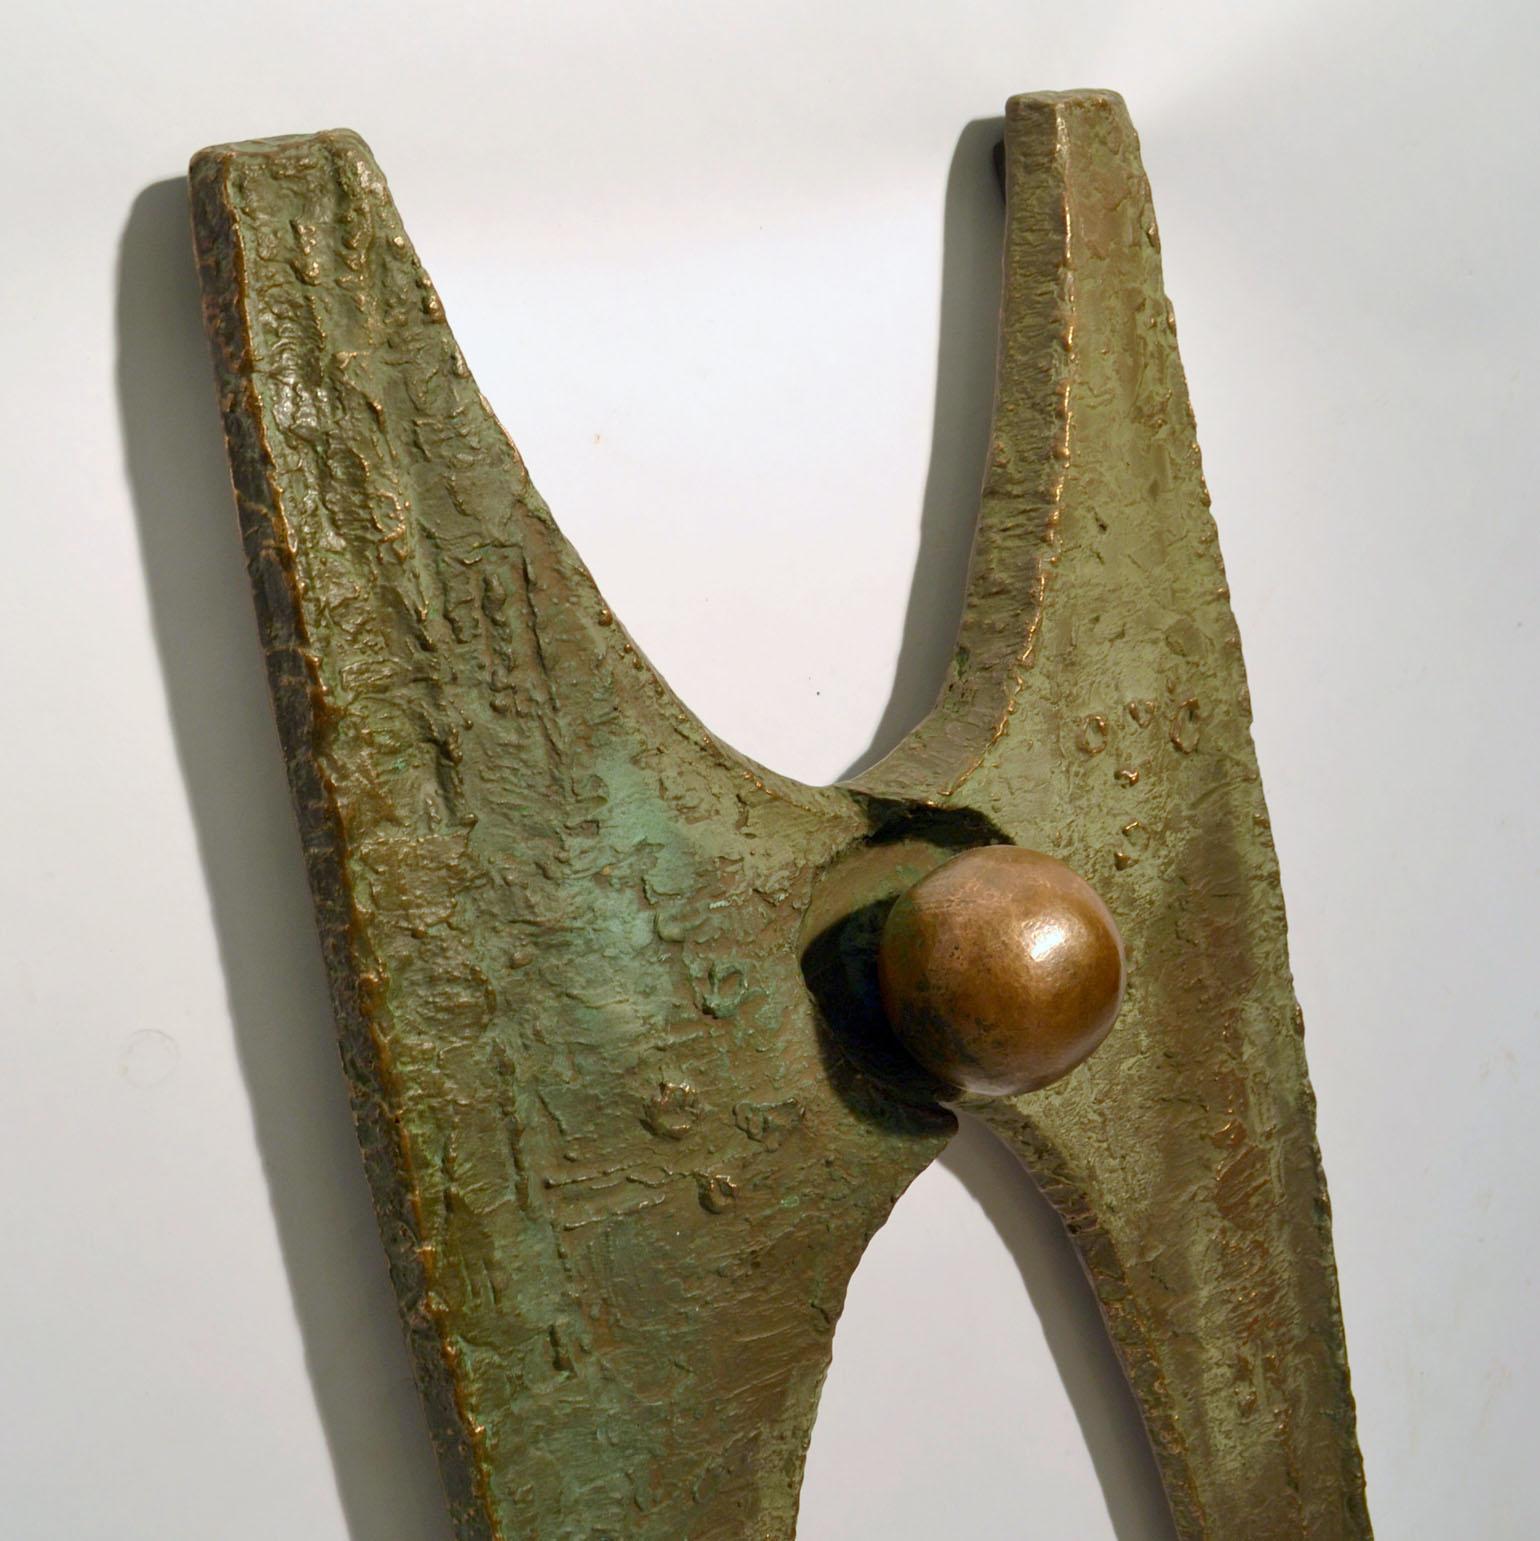 Large midcentury sculptural bronze door or wall mounted abstract sculpture for in-or outdoors. It was originally mounted on the front door of a villa in Germany in the 1960s as an over sized door handle. 
This one-of-a-kind art piece defines